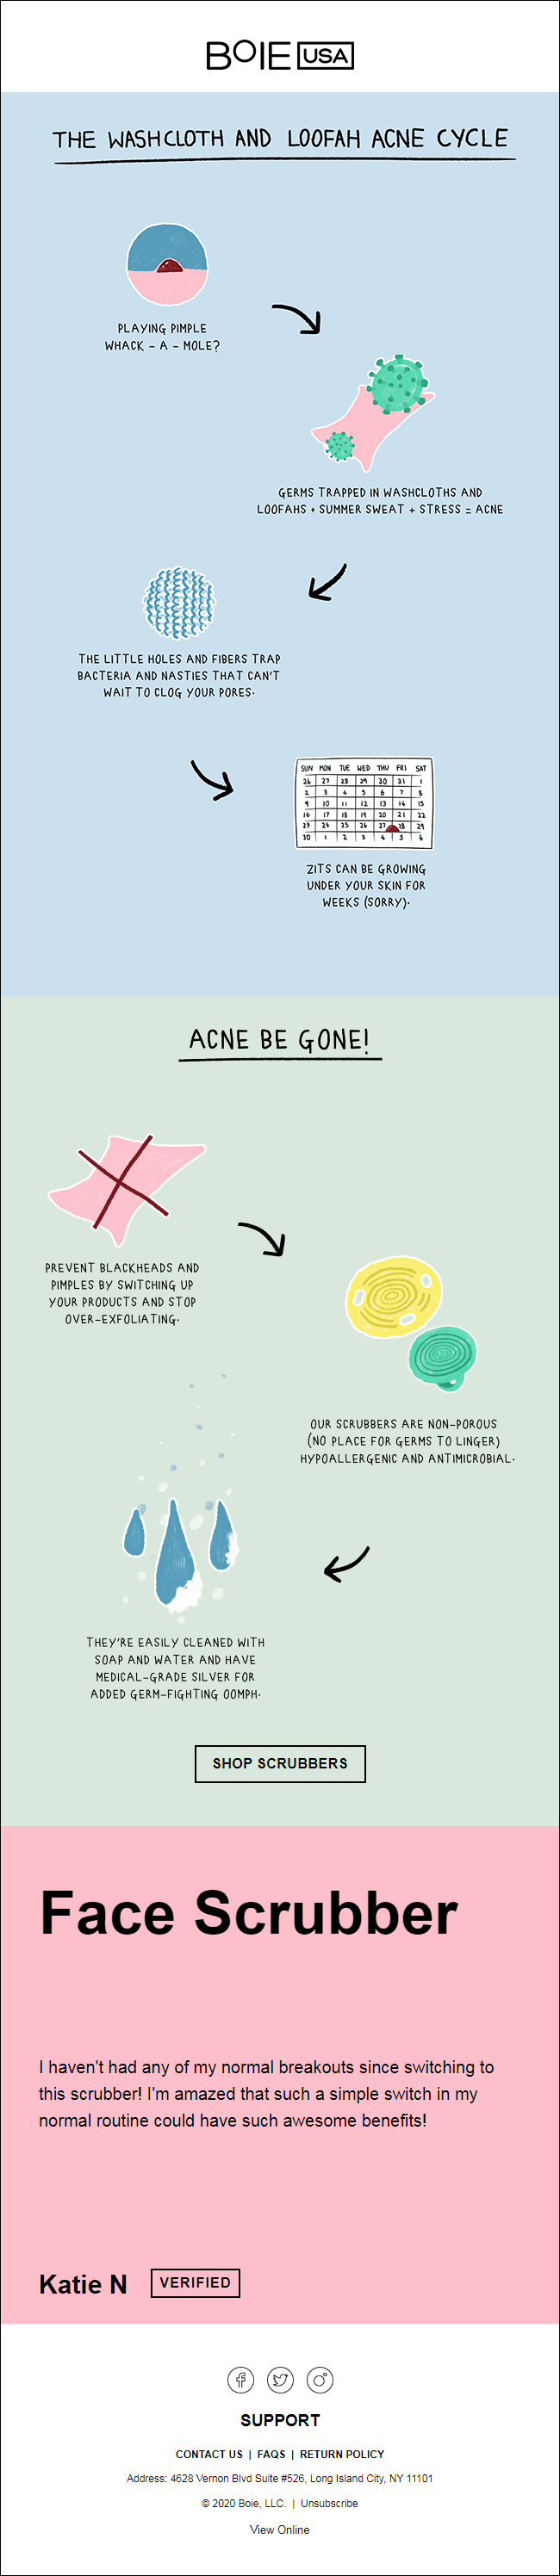 Acne Cycle